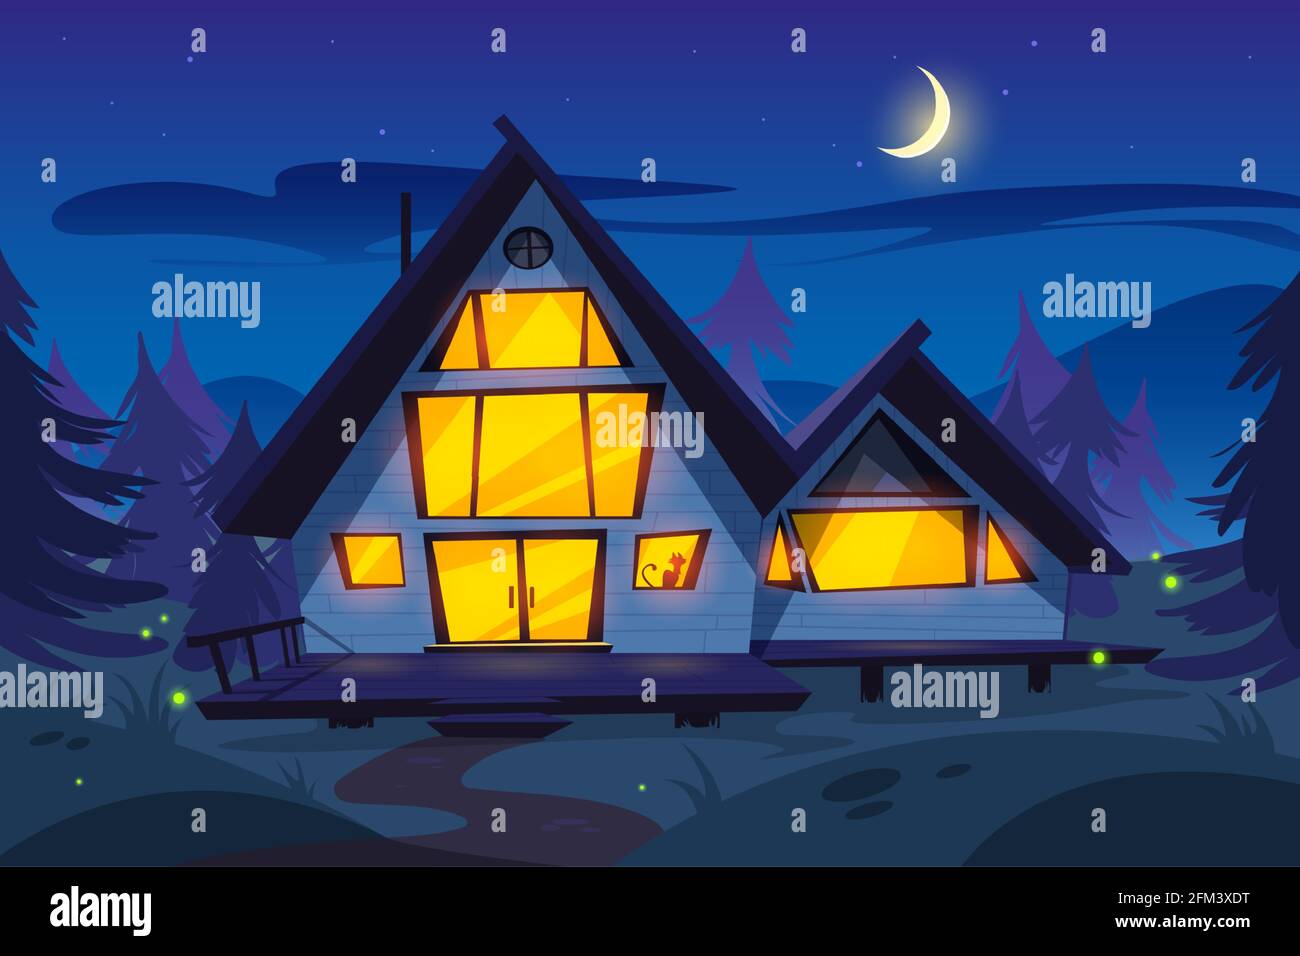 Wooden house in forest at night. Forester cottage. Vector cartoon summer wood landscape with house with glow windows, fireflies, pine trees, moon and stars on sky Stock Vector